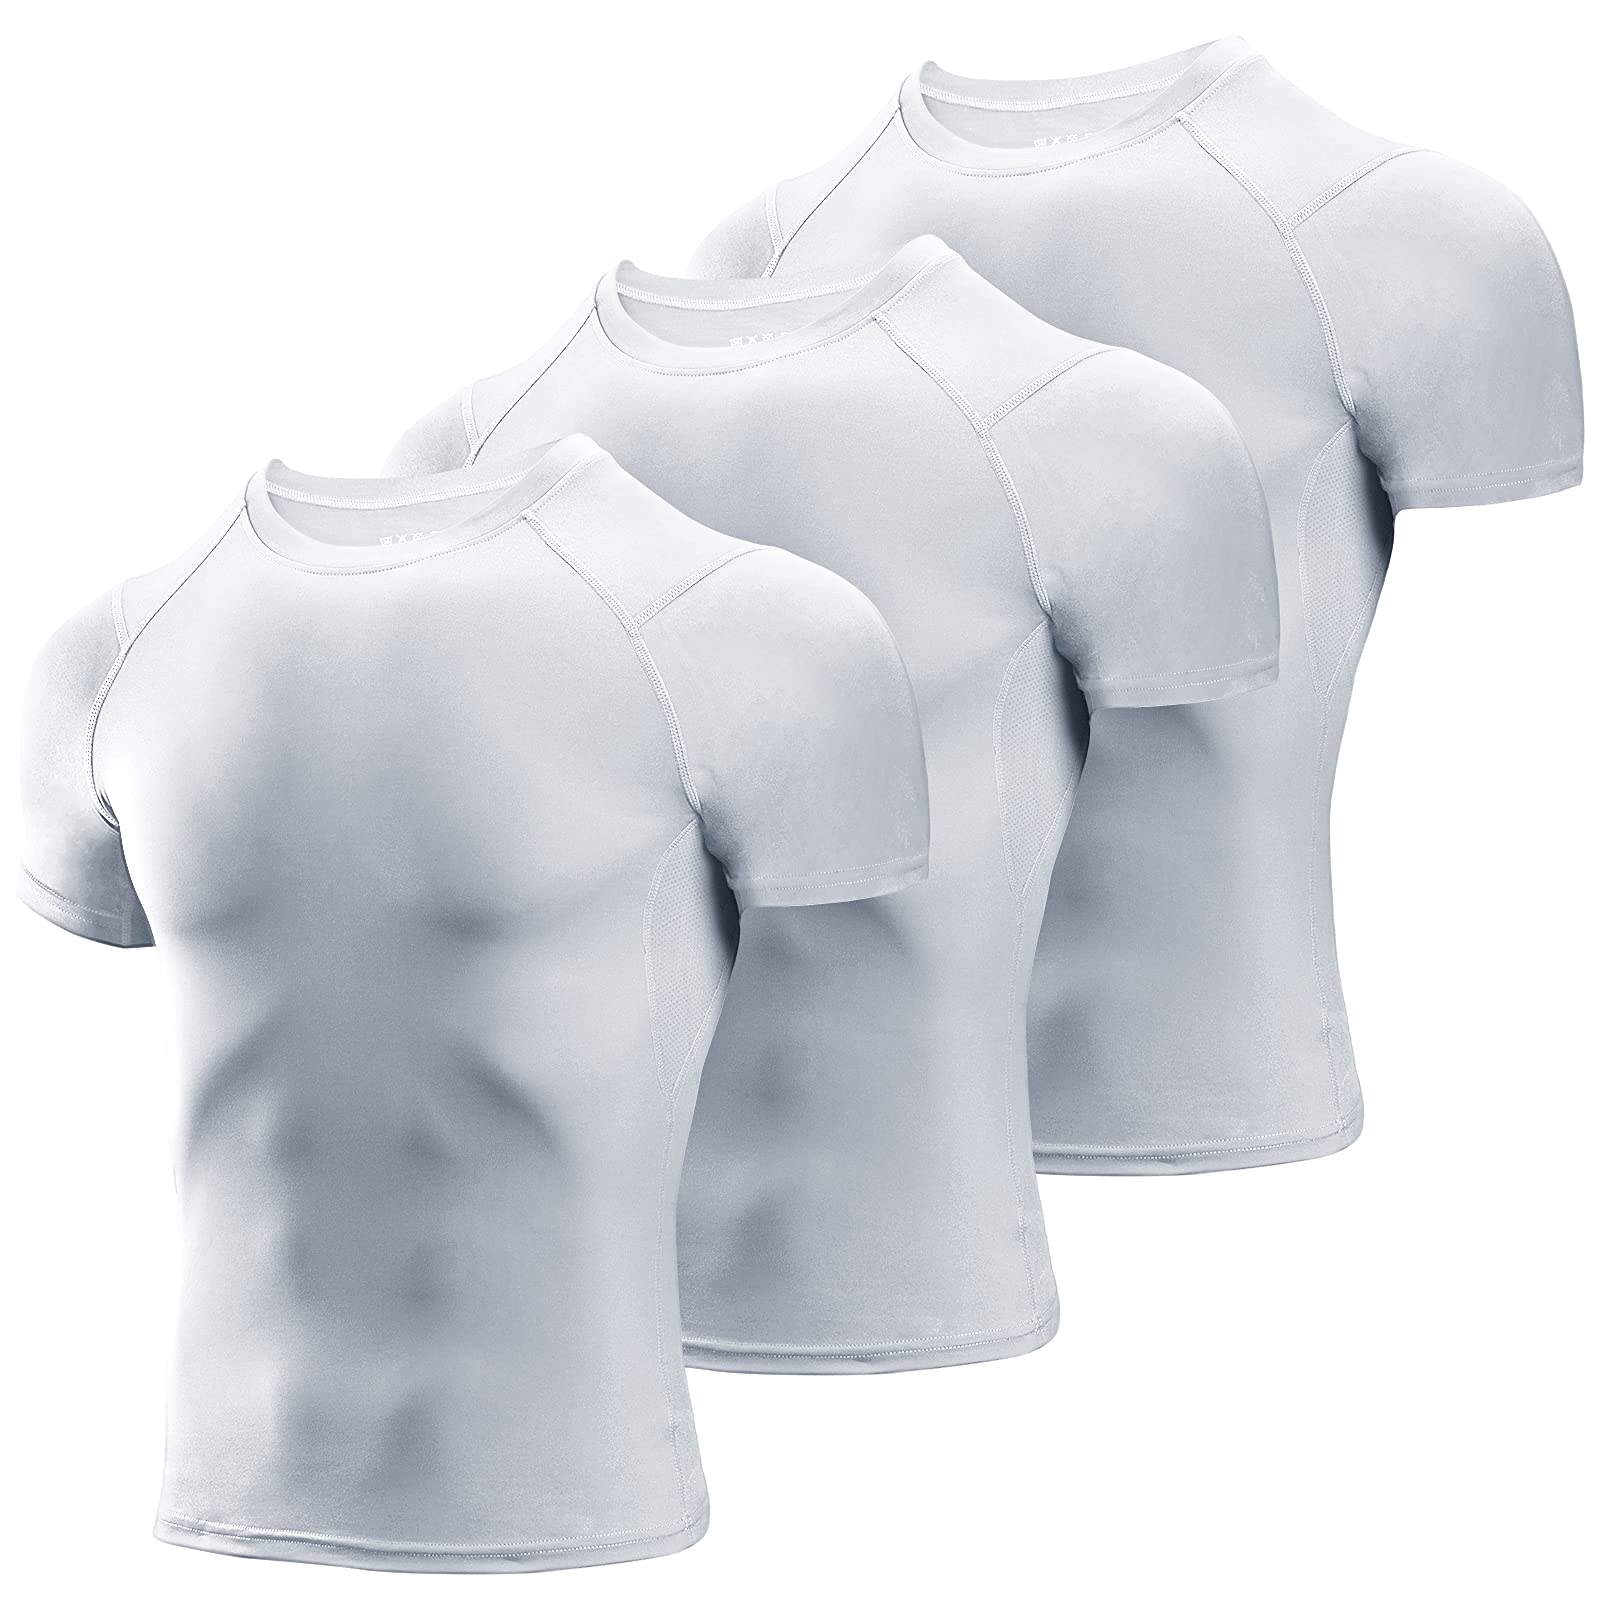 Cool Quick Drying Compression Workout 3 Pack Shirts